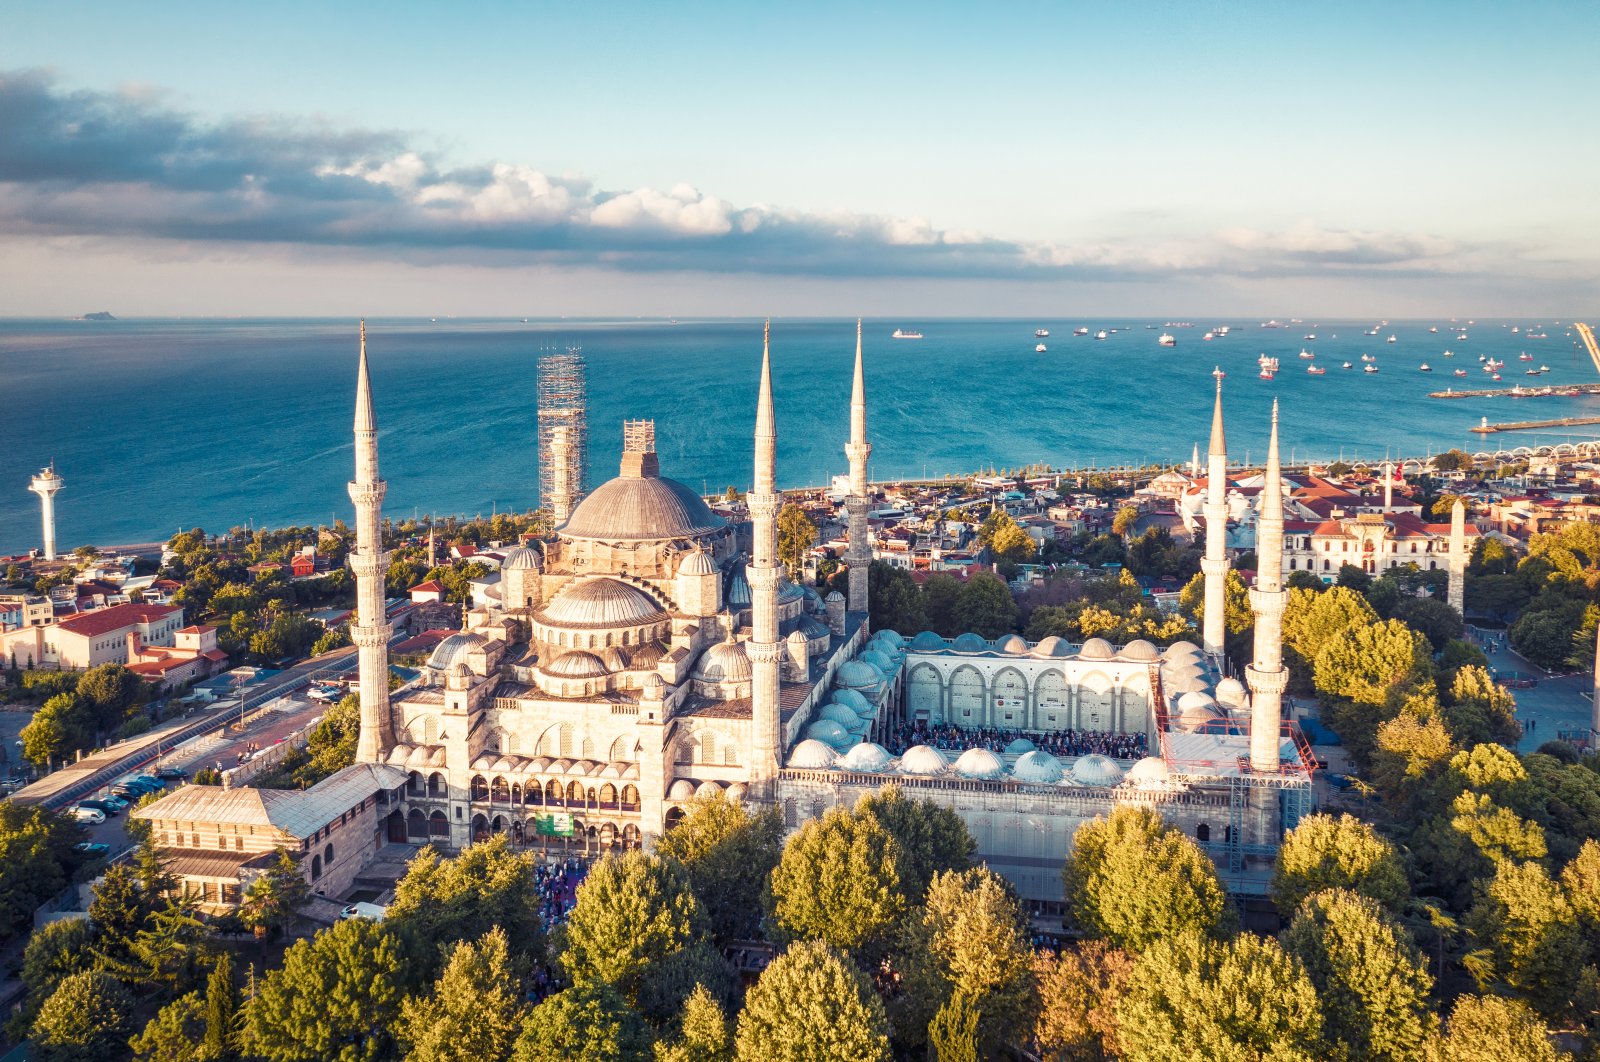 The historic Sultan Ahmed Mosque (The Blue Mosque), Istanbul, Türkiye. (Getty Images Photo)